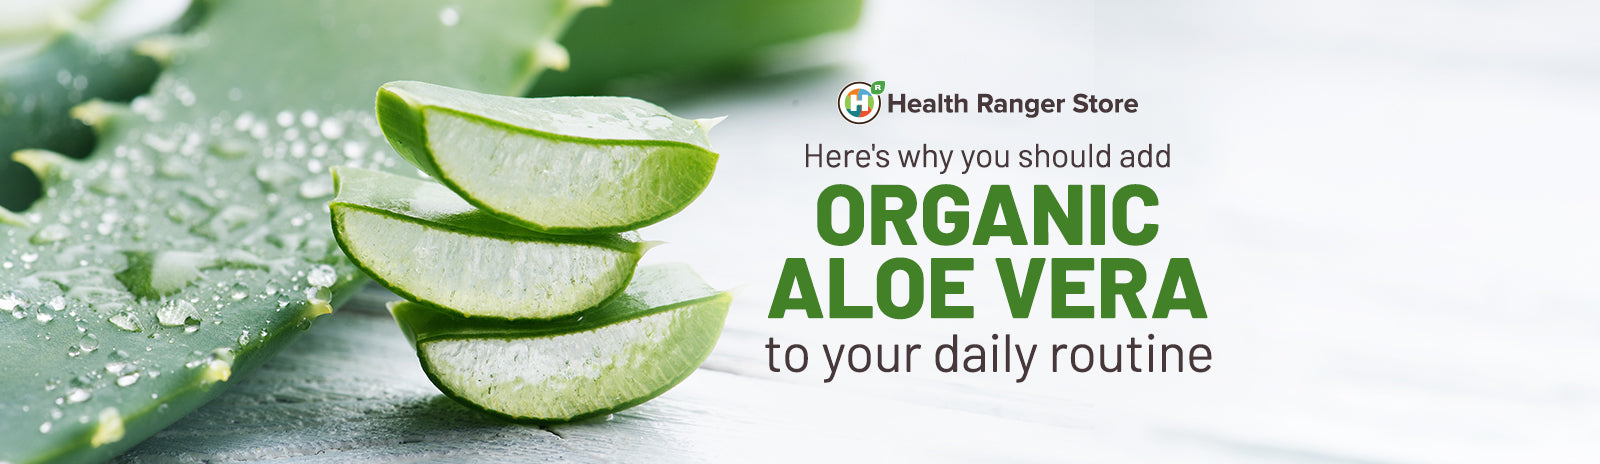 7 Reasons to add organic aloe vera to your daily routine